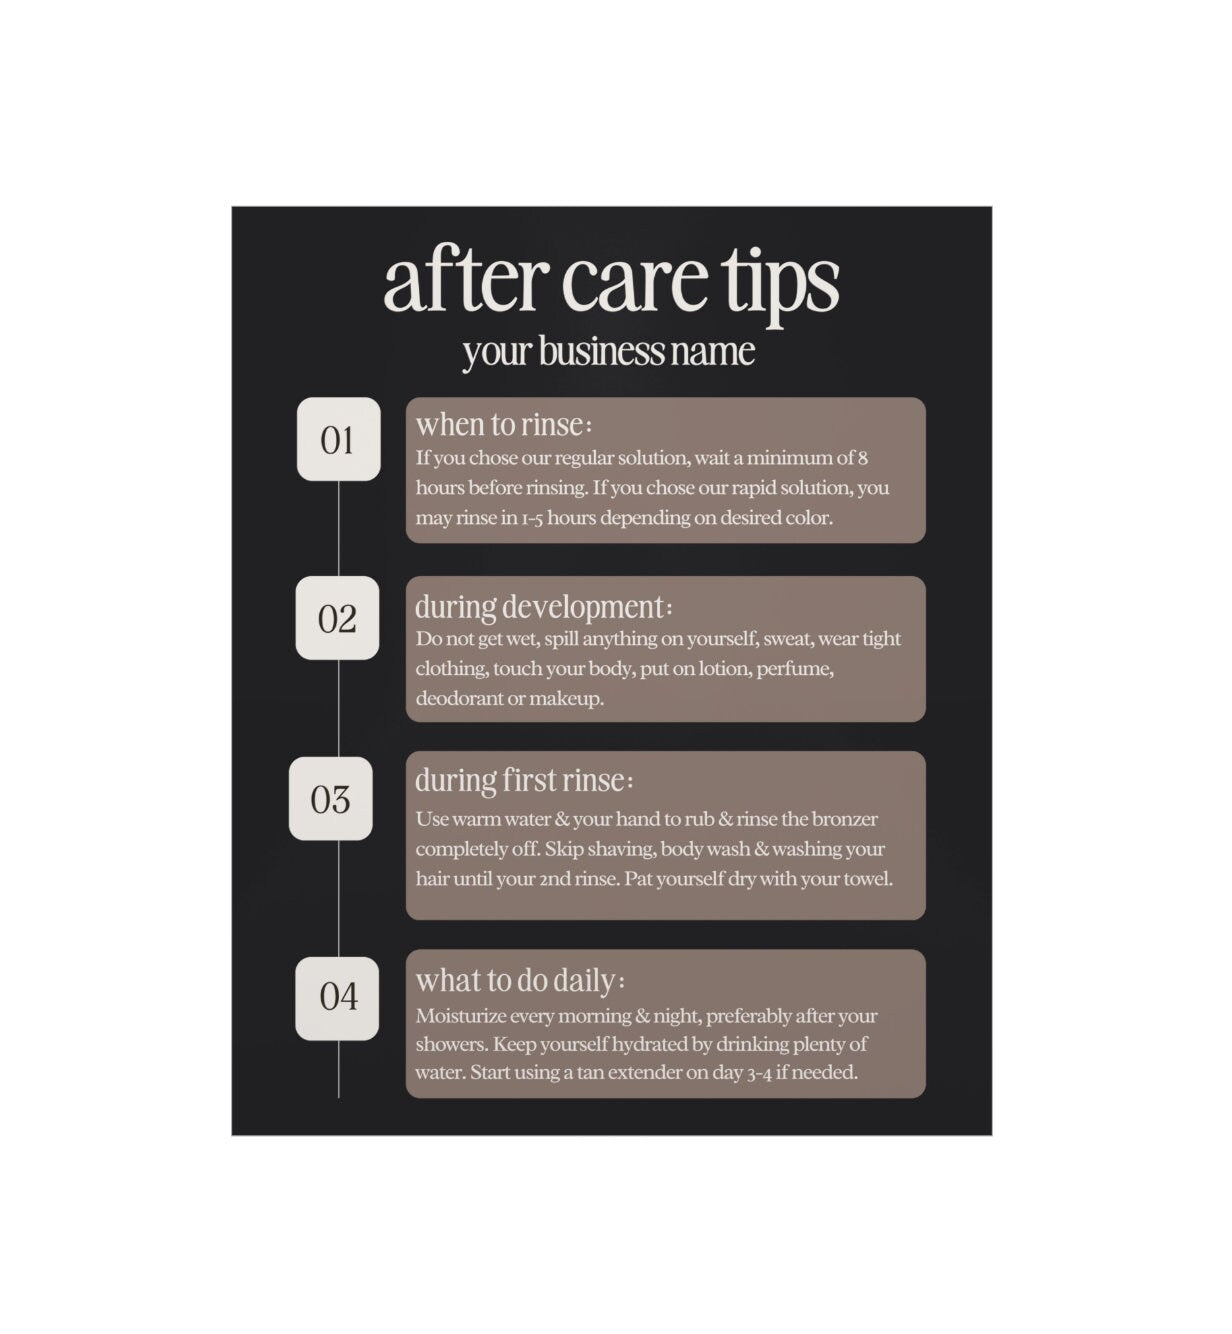 After Care Tips Wall Print - Spray Tan Tips Wall Decor Poster